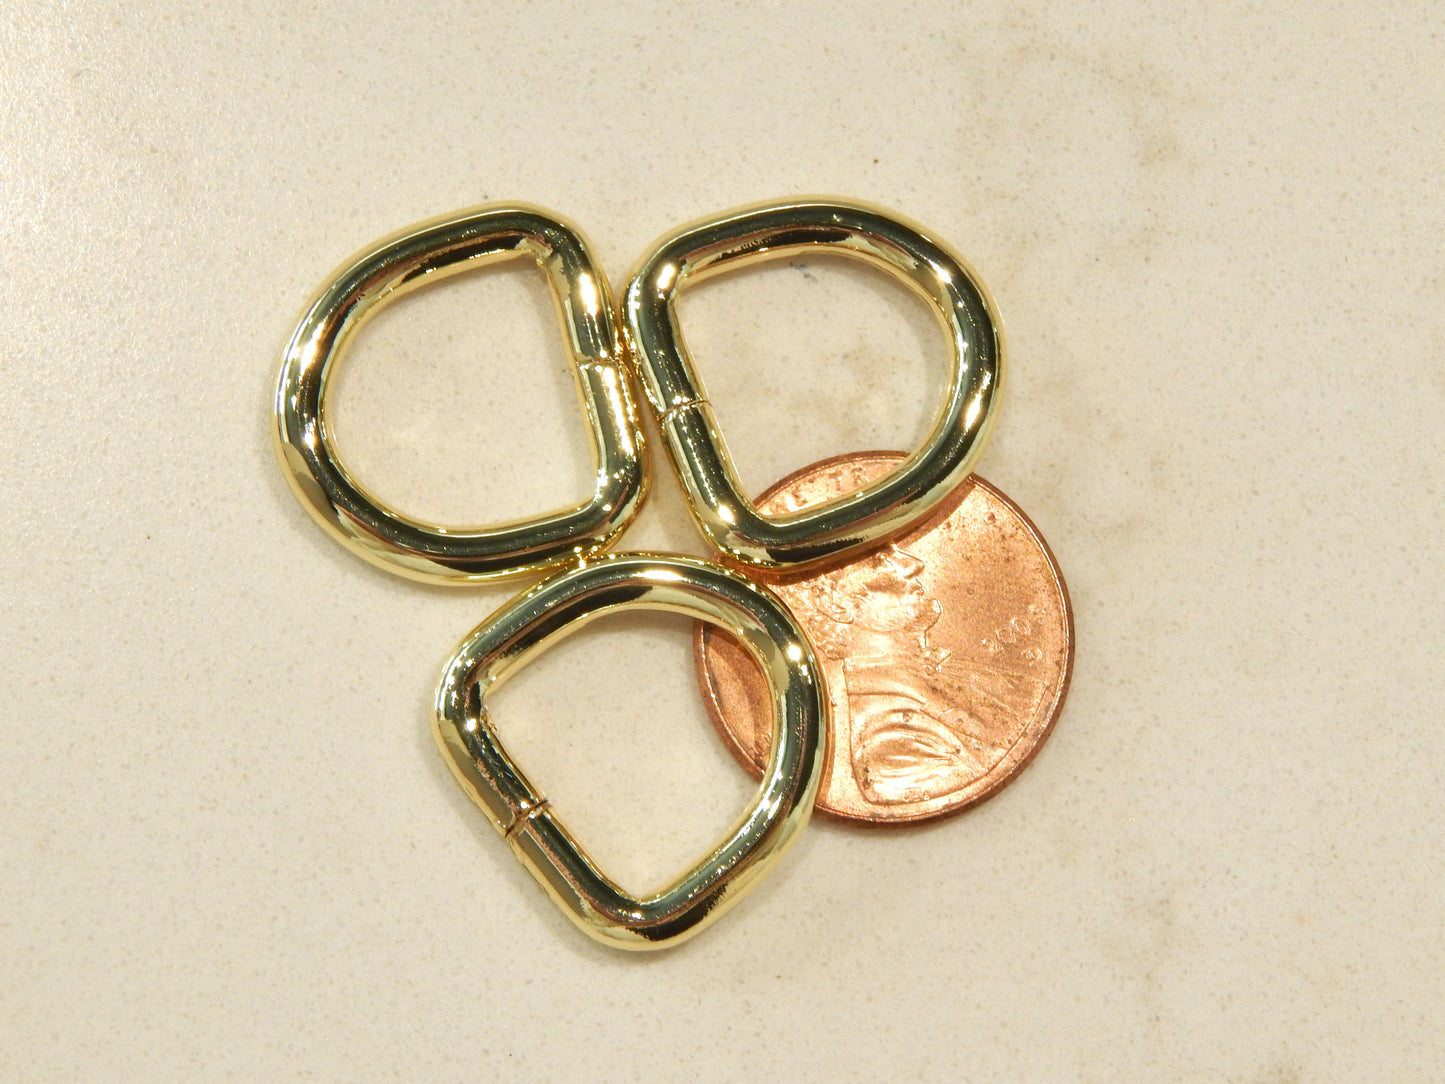 D-Rings - 1/2" - Gold, Silver, & Iridescent